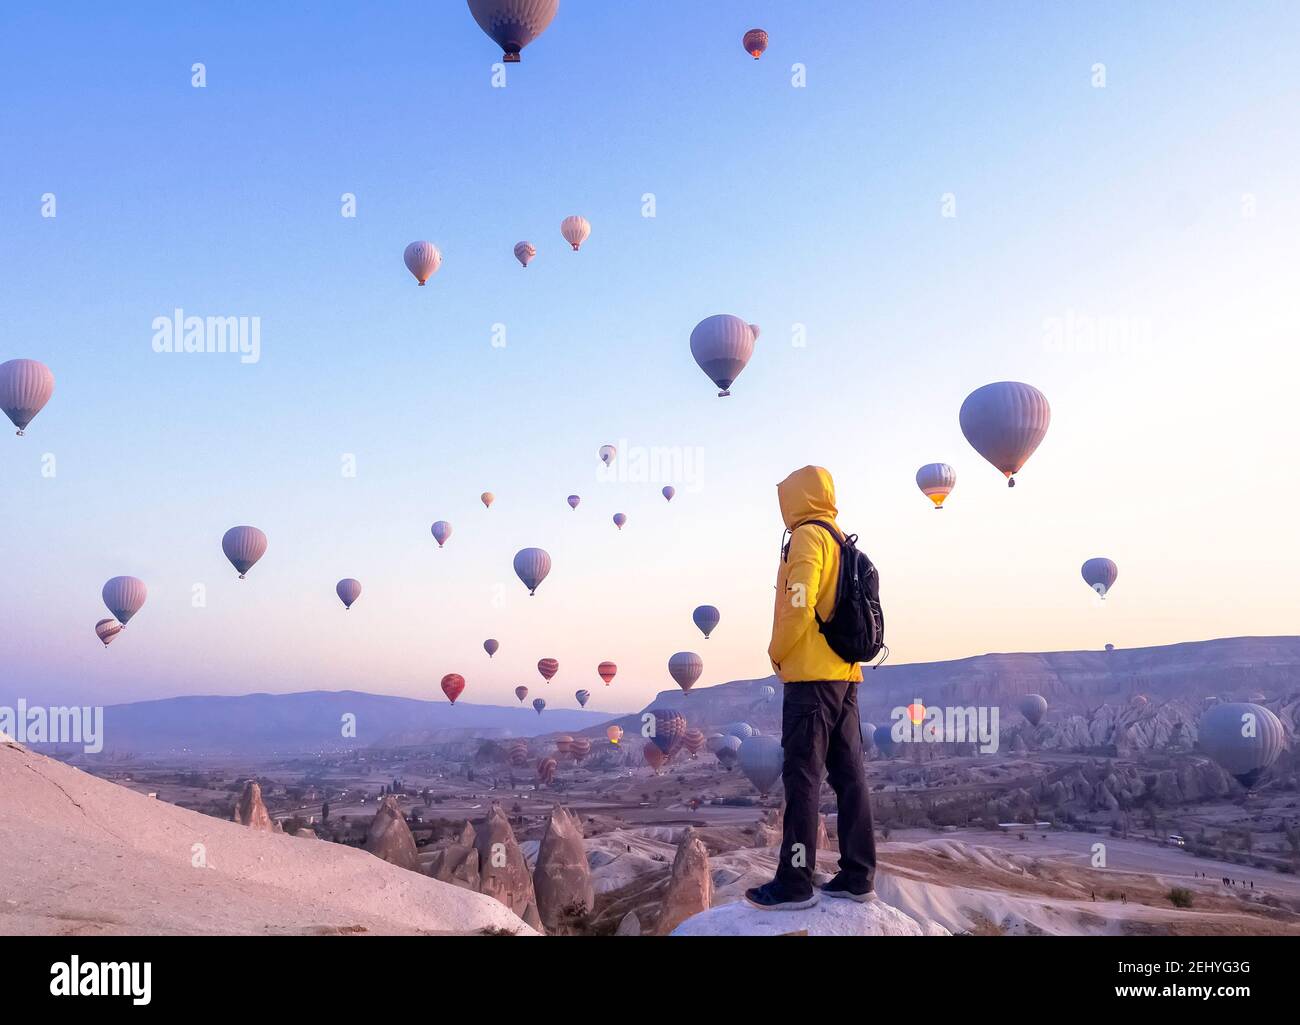 A tourist with a backpack see on soaring hot air balloons in Cappadocia, Turkey, concept achievement, team, leader. Stock Photo